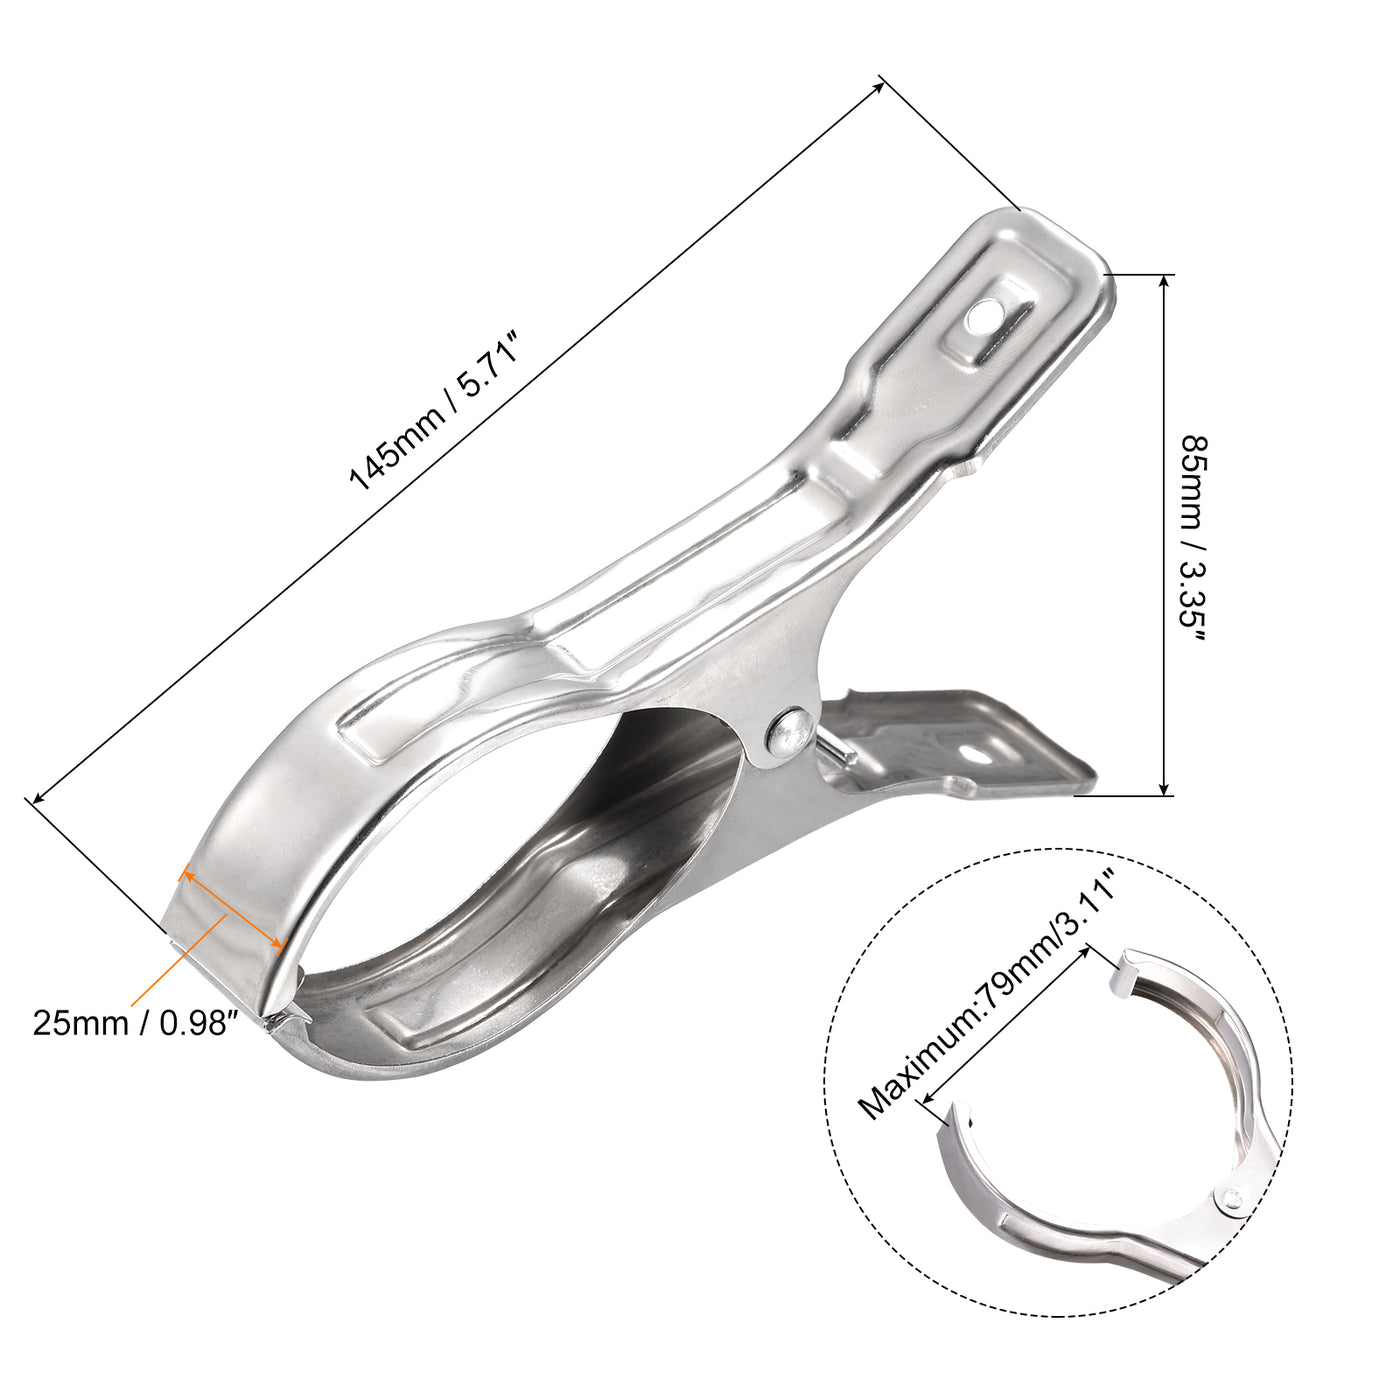 uxcell Uxcell Tablecloth Clips - 145mm Stainless Steel Clamps for Fixing Table Cloth Hanging Clothes, 10 Pcs